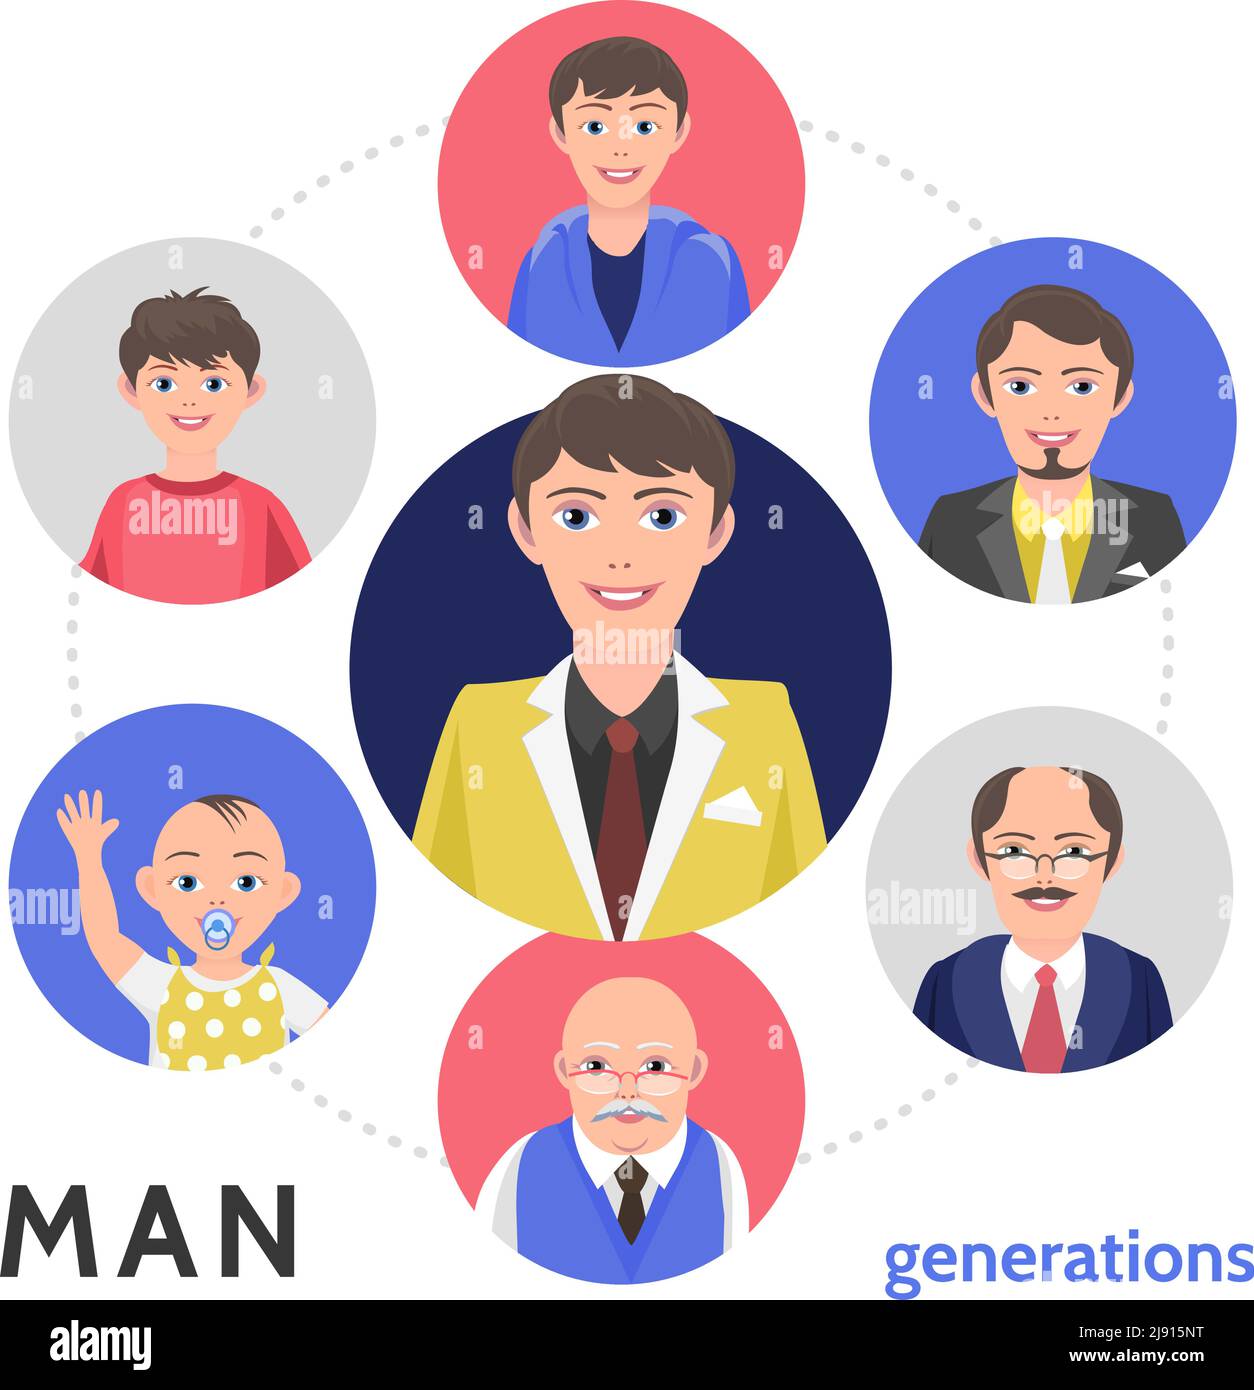 Flat people aging process concept with men growing up from baby to old age in colorful circles isolated vector illustration Stock Vector